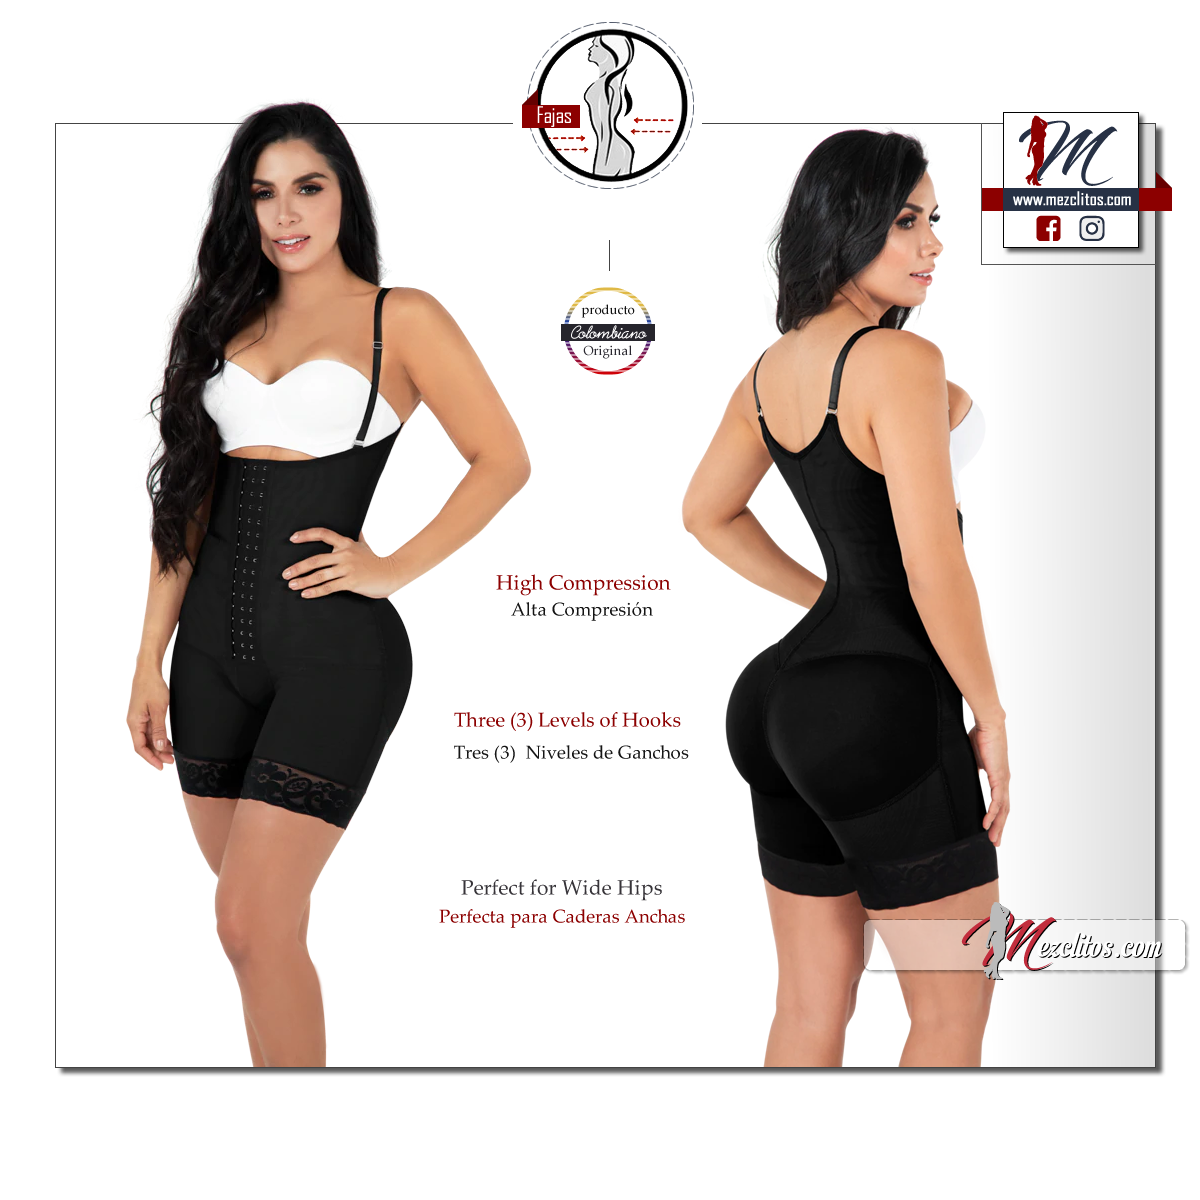 Top 5 Waist Trainers Ranked by Compression Level - Hourglass Angel